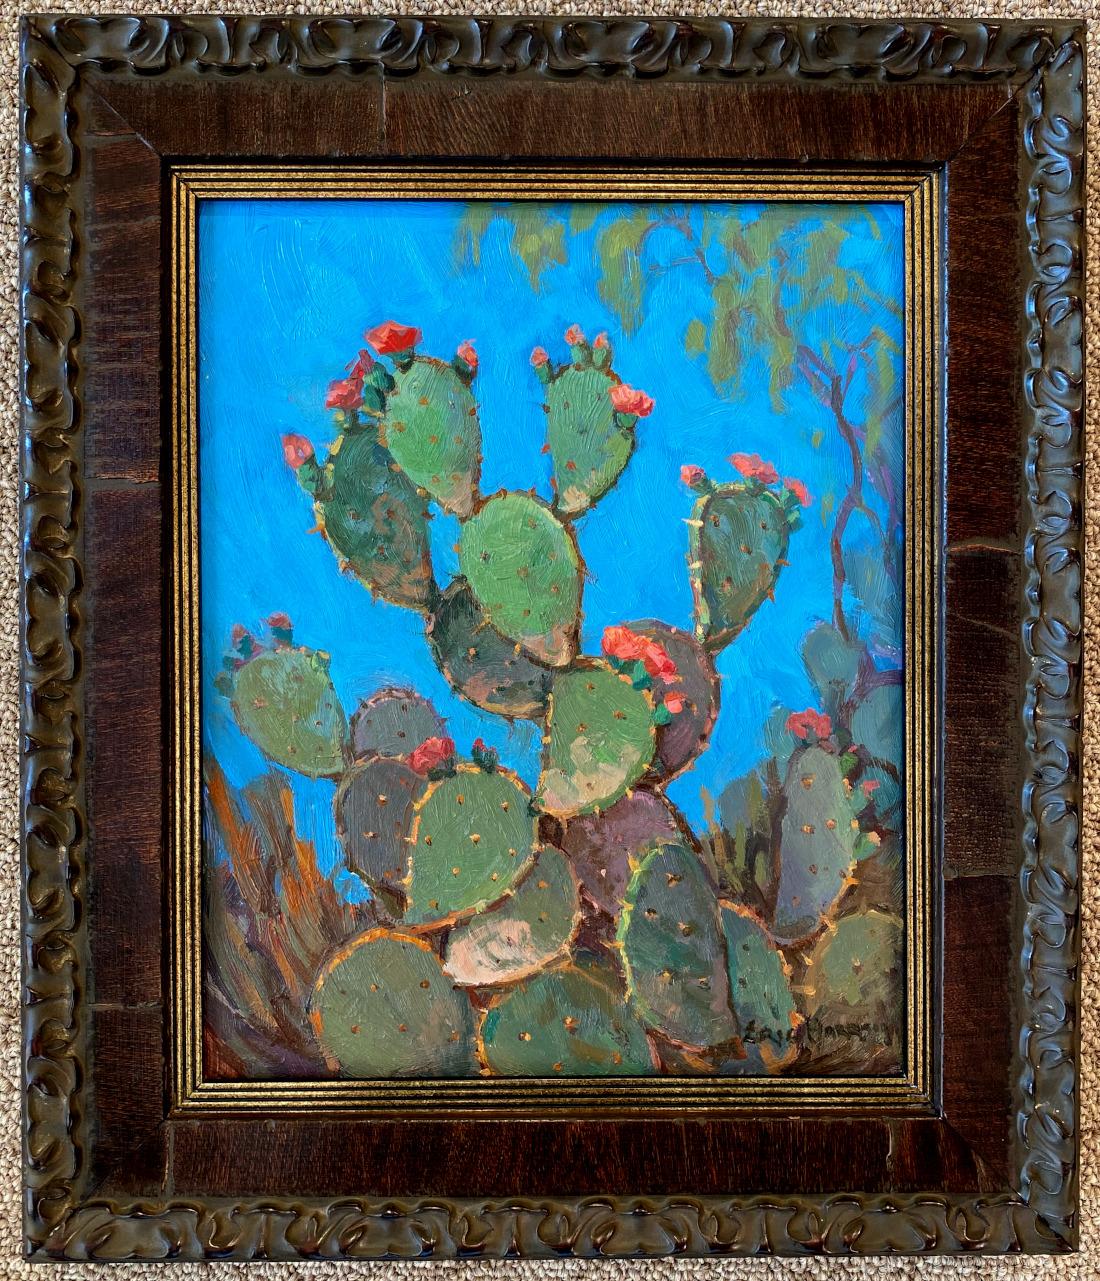 Eric Harrison Landscape Painting - "CACTUS WITH CORAL RED BLOOMS" PRICKLY PEAR TEXAS HILL COUNTRY